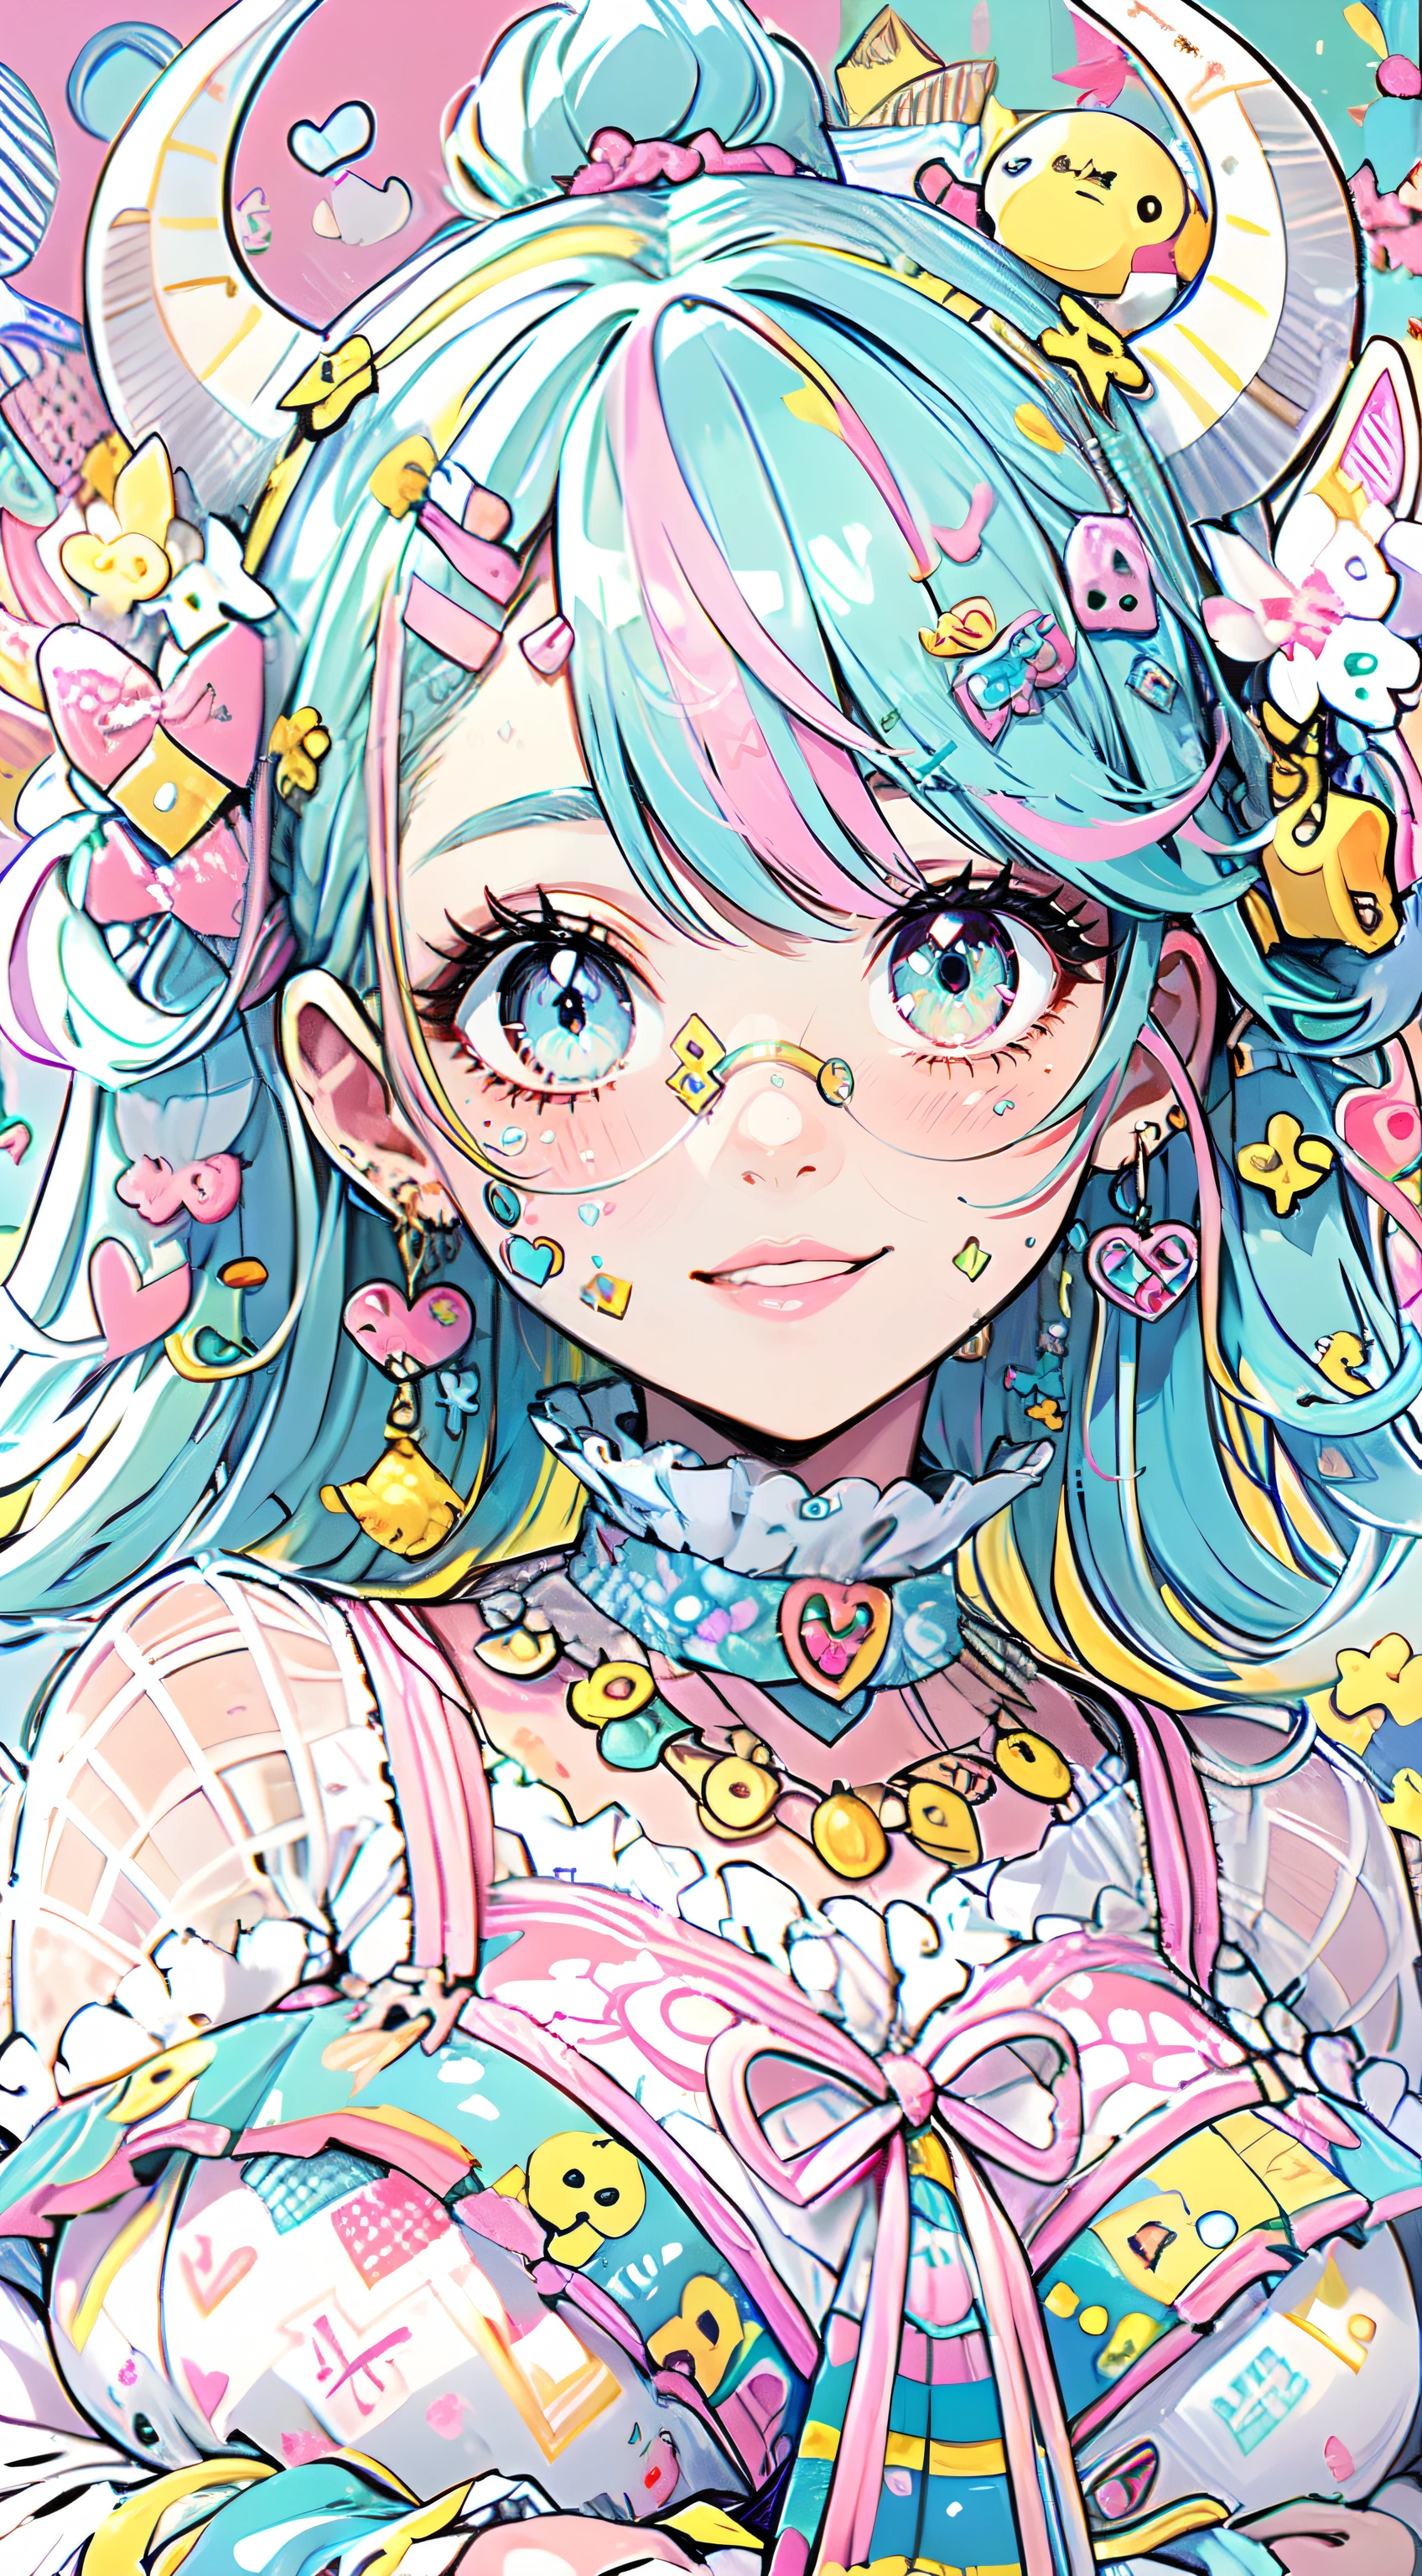 "kawaii, cute, adorable woman with pink, yellow, and baby blue color scheme. She is dressed in sky-themed clothes made out of clouds and sky motifs. Her outfit is fluffy and soft, with decora accessories like hairclips. She embodies the vibrant and trendy Harajuku fashion style." horns, demon wings, big ,big ass, big lips, juicy lips, huge hair, smile, mature, adult, masterpiece, highly detailed